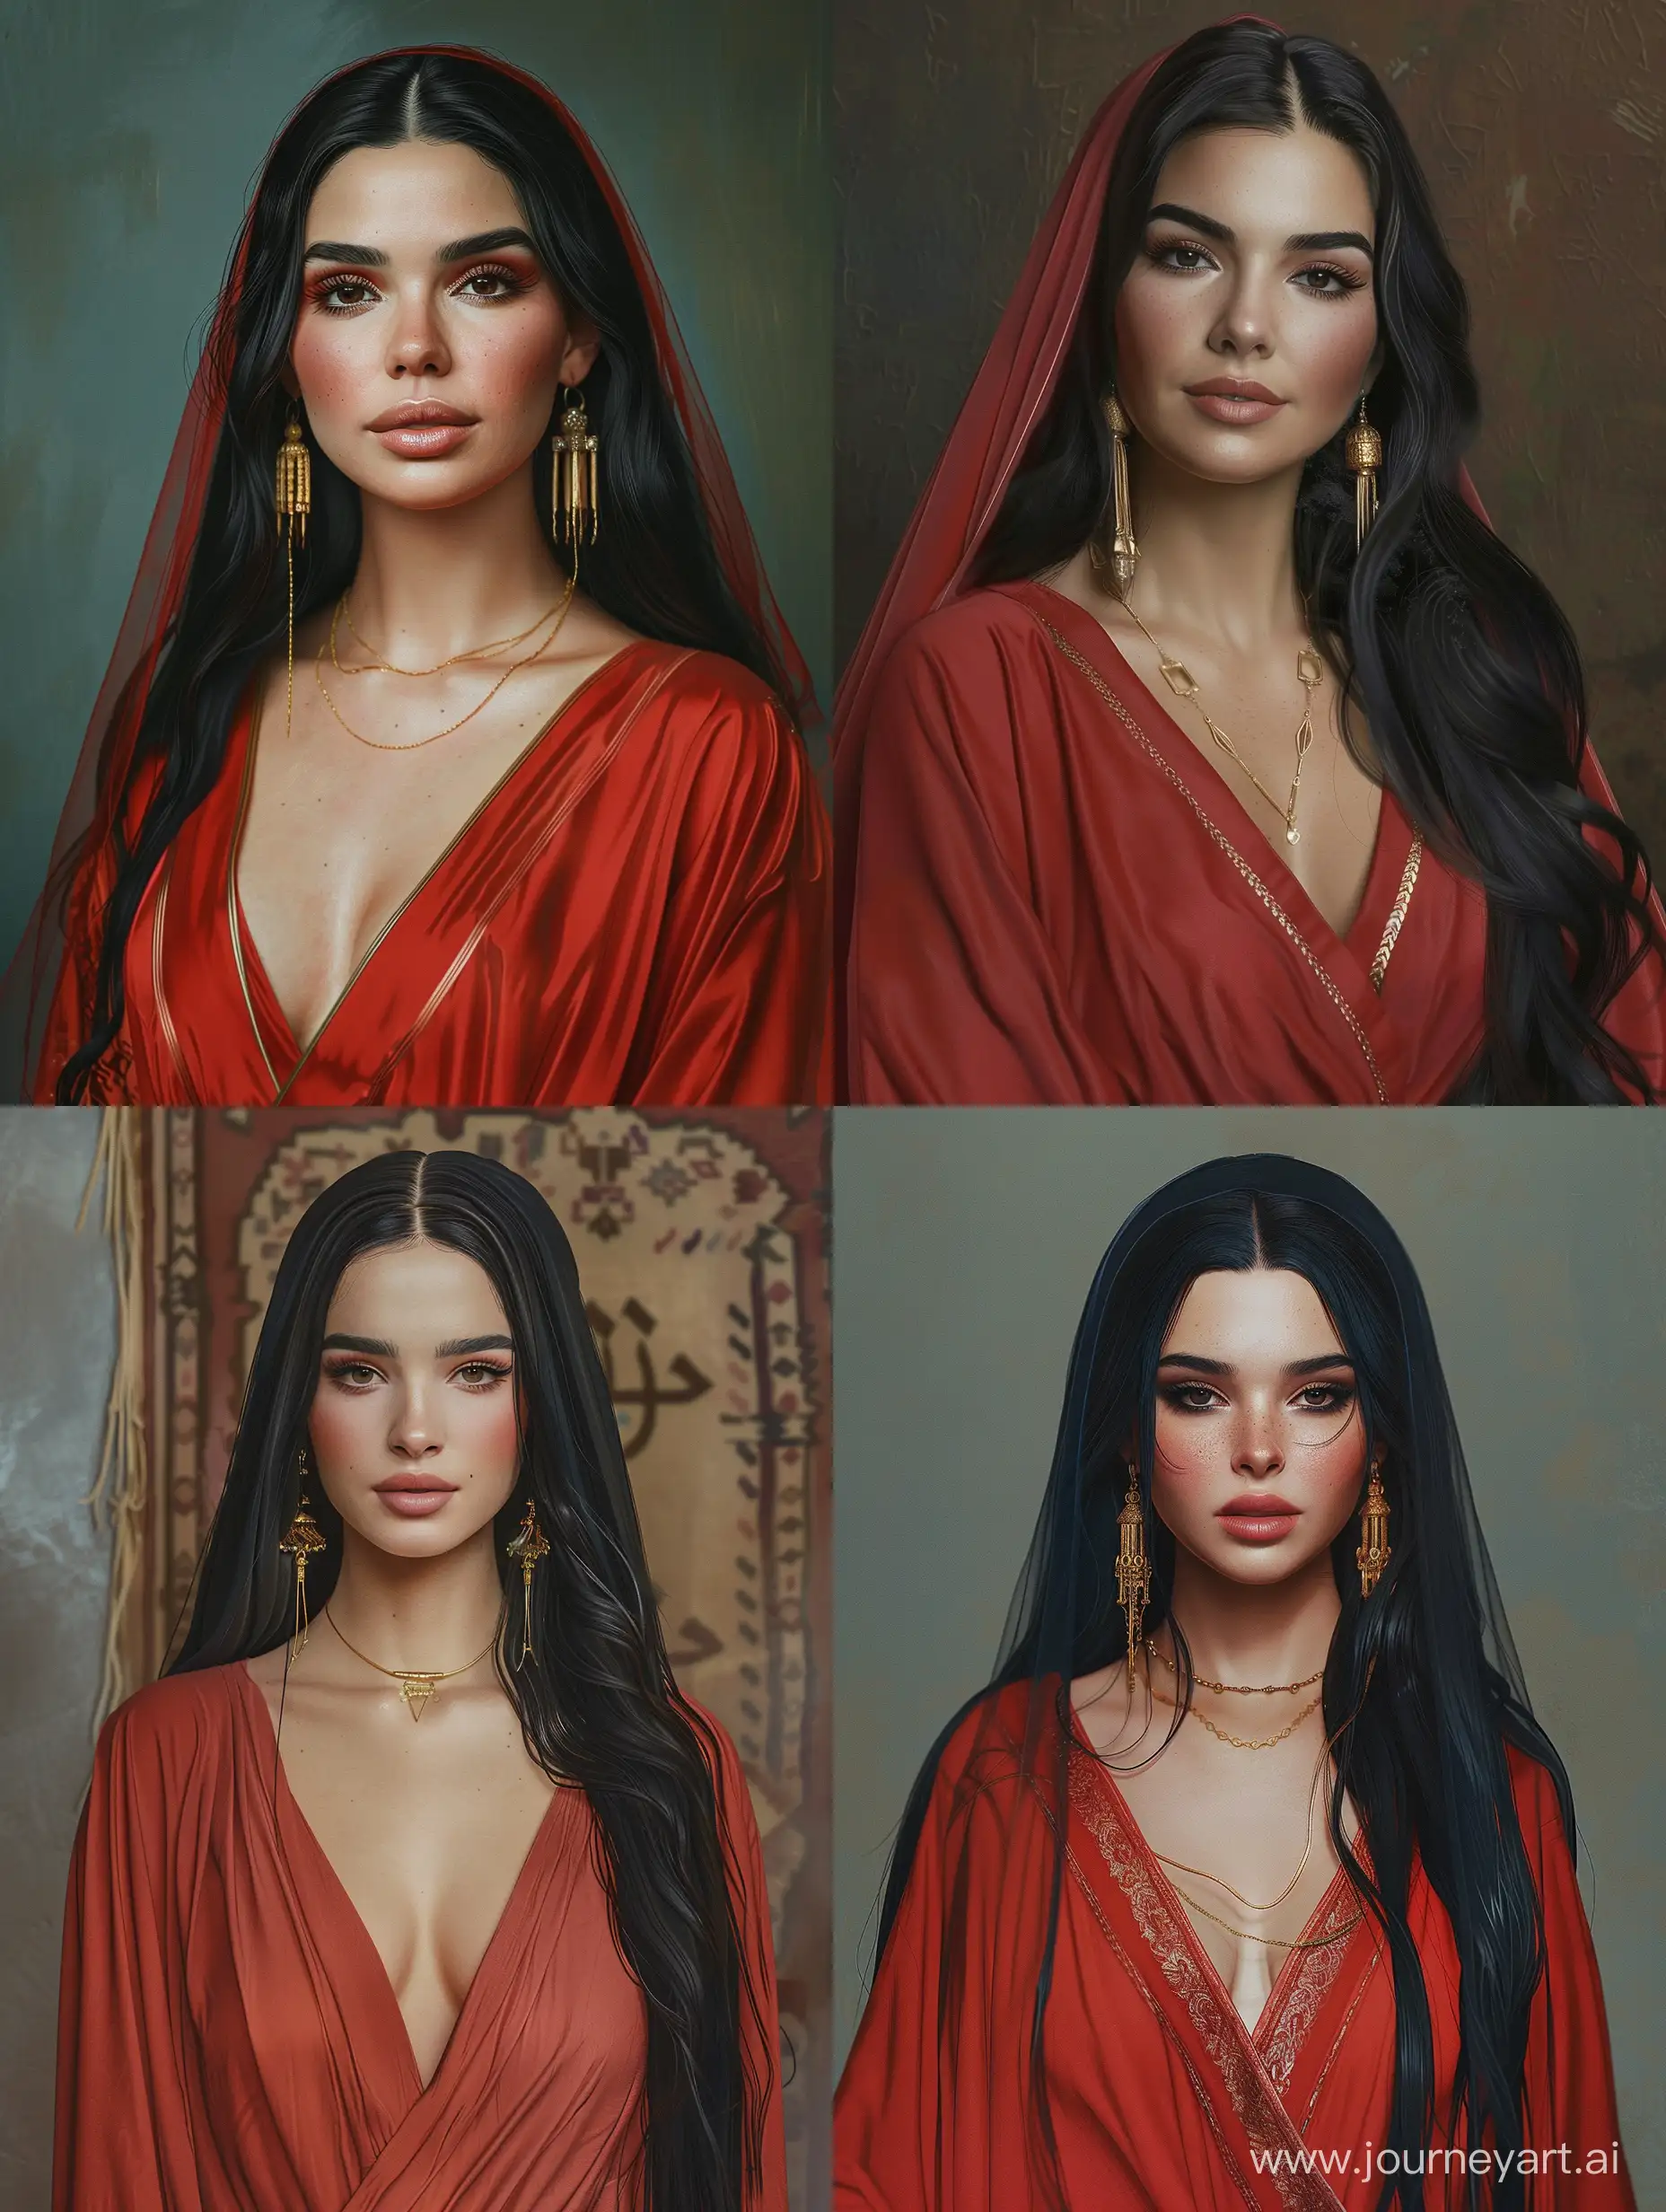 portrait of an adult beautiful elegant arab woman, long black slightly wavy hair, there are some hair strings at the side of her face, elegant, too beautiful, highly realistic, ruddy skin, beautiful, full lips, feeling of lightness and joy, hyperrealism, skin very elaborated, direct gaze, full upper body in picture, she wears a red moroccan caftan dress with a high neckline and no cleavage and the focus of the picture is on her face and shoulders. She also wears golden hanging earrings. She has black fox eyes, long eyelashes, olive skin colour, blushed cheeks, straight thick black eyebrows, her hair is covered by a long veil, golden necklace, slim face